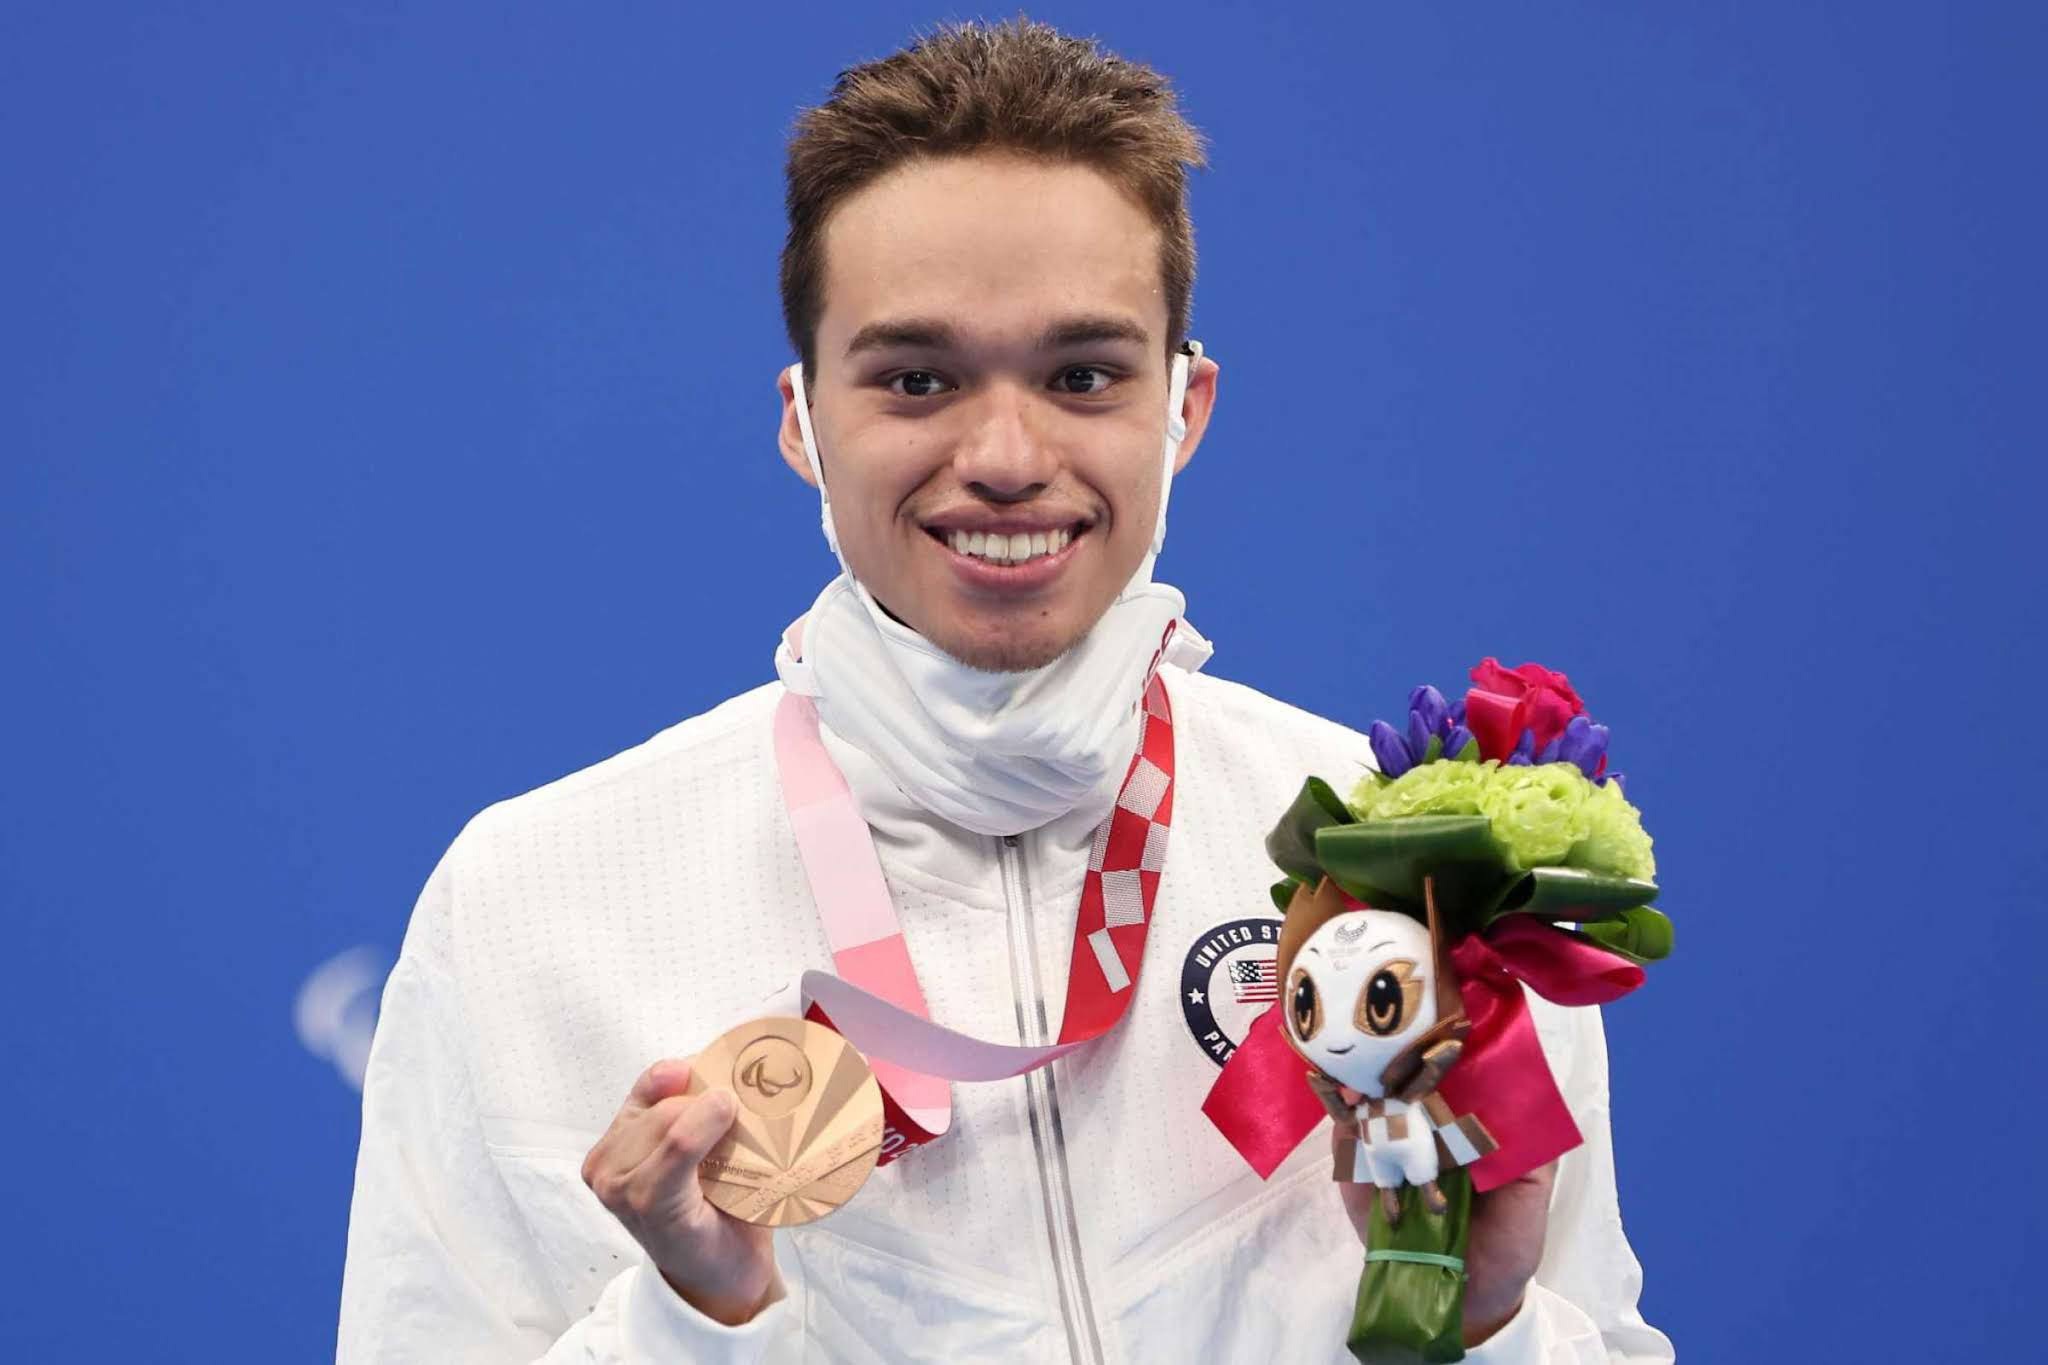 Matthew Torres Wins Bronze In 400m S8 Freestyle At 2020 Tokyo Paralympic Games